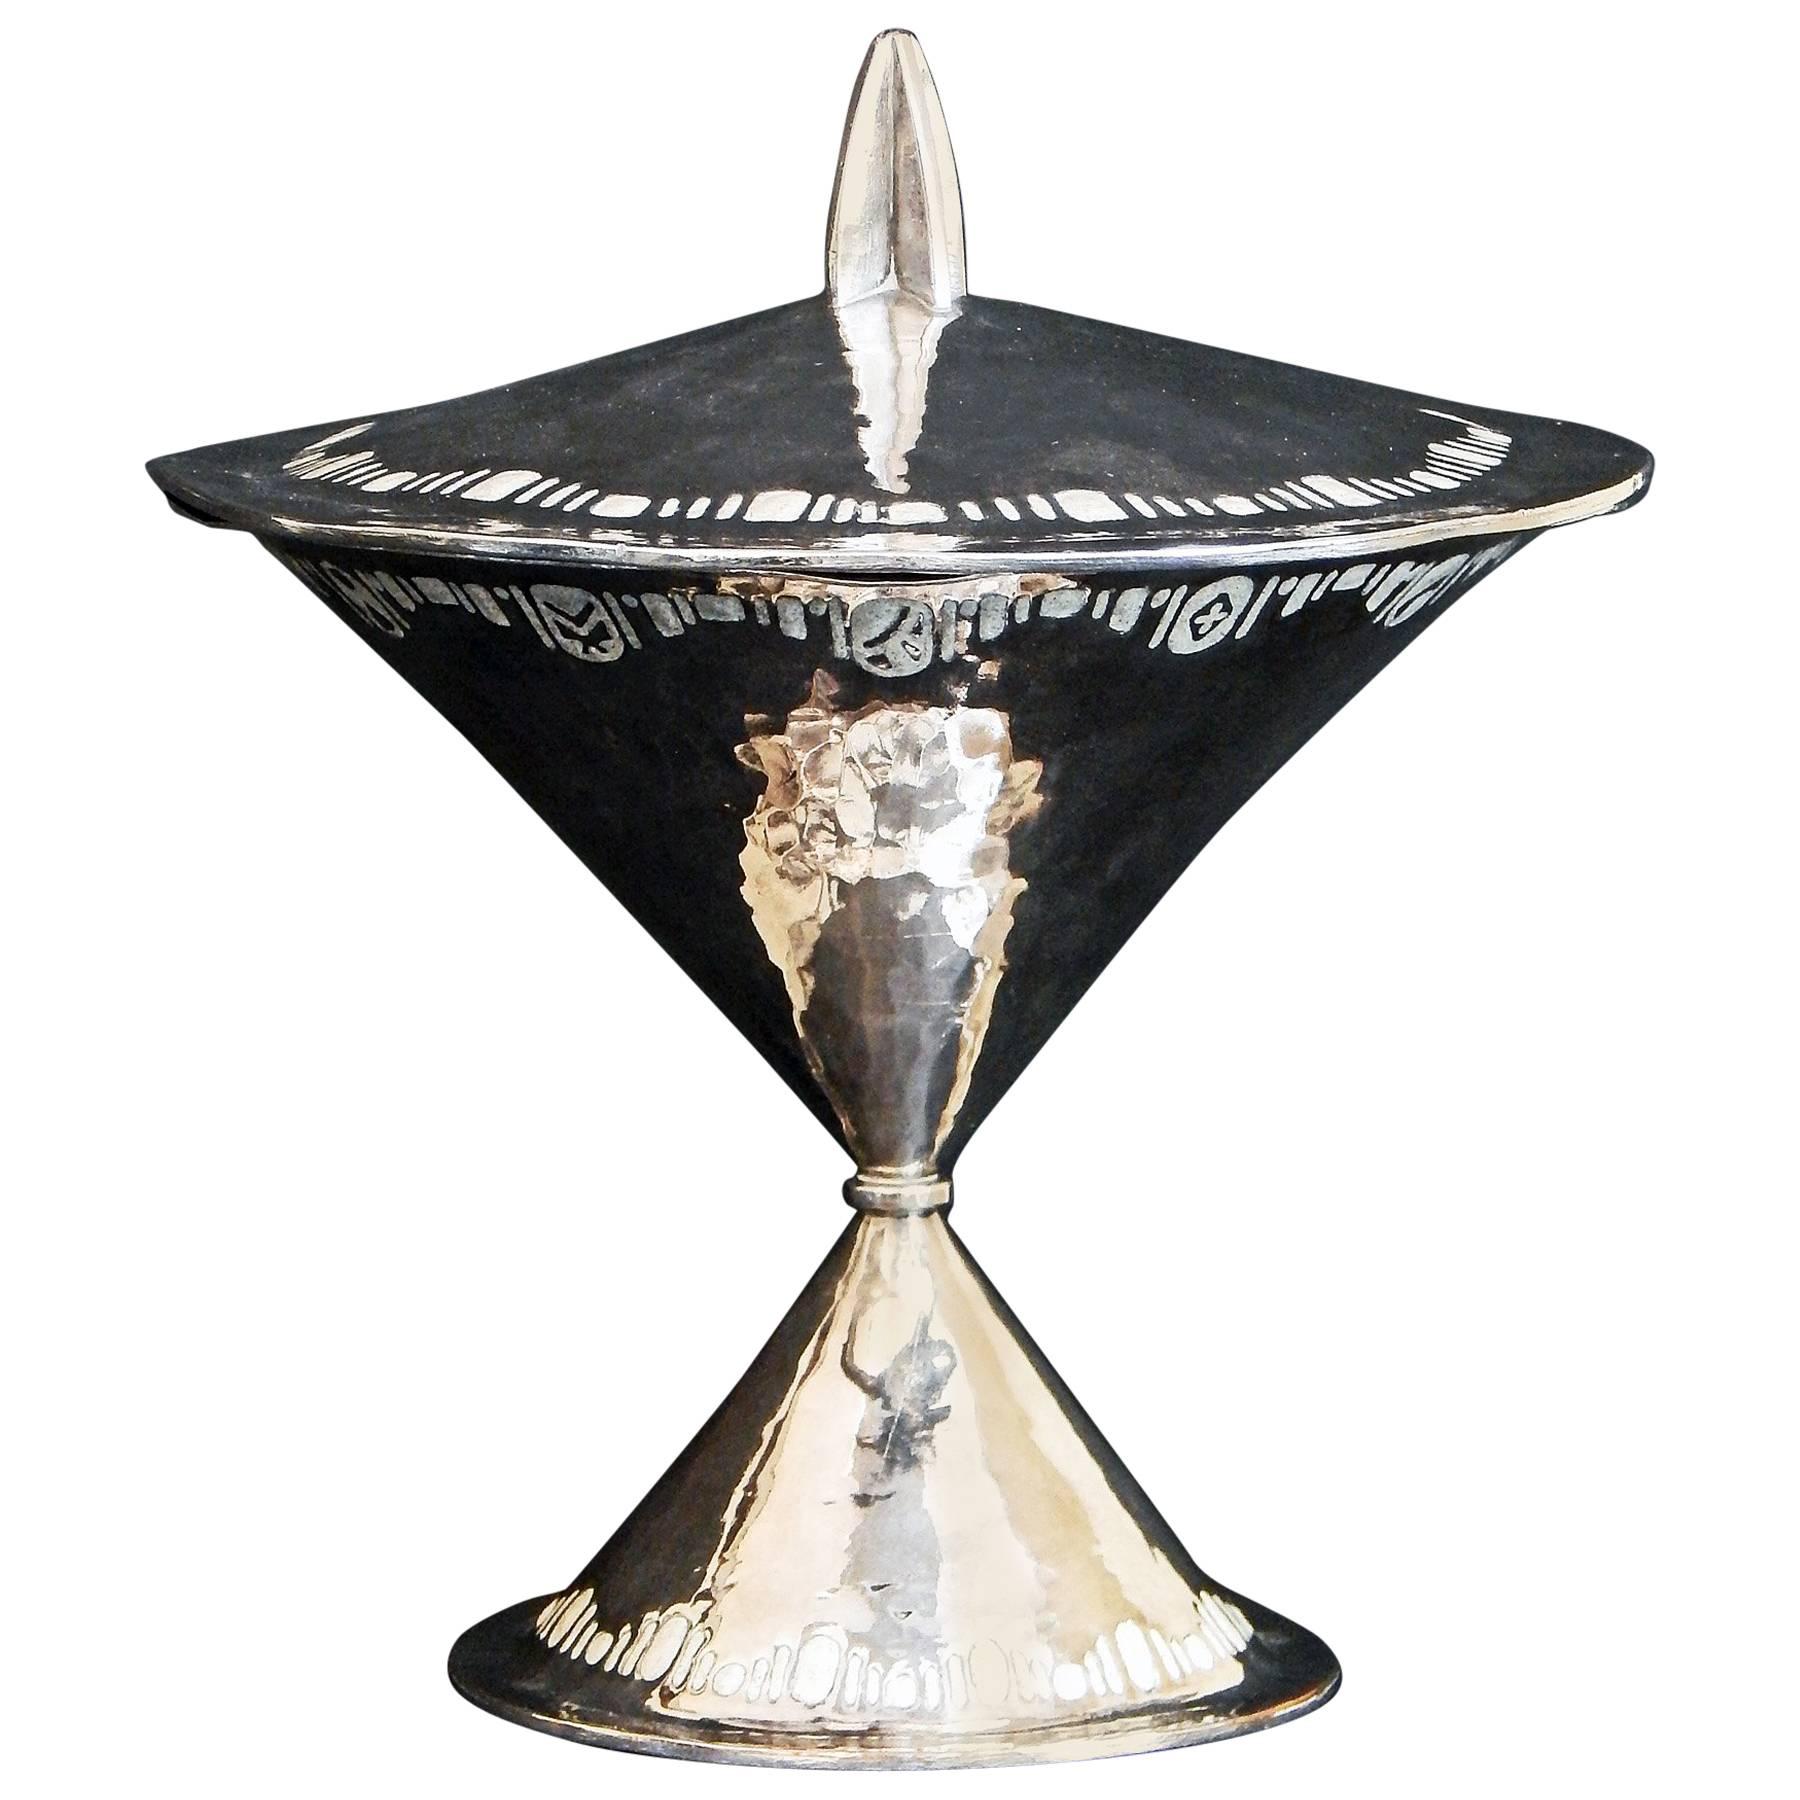 Important Art Deco Lidded Silver Pinch-Wasted Compote by Carrel, 1922